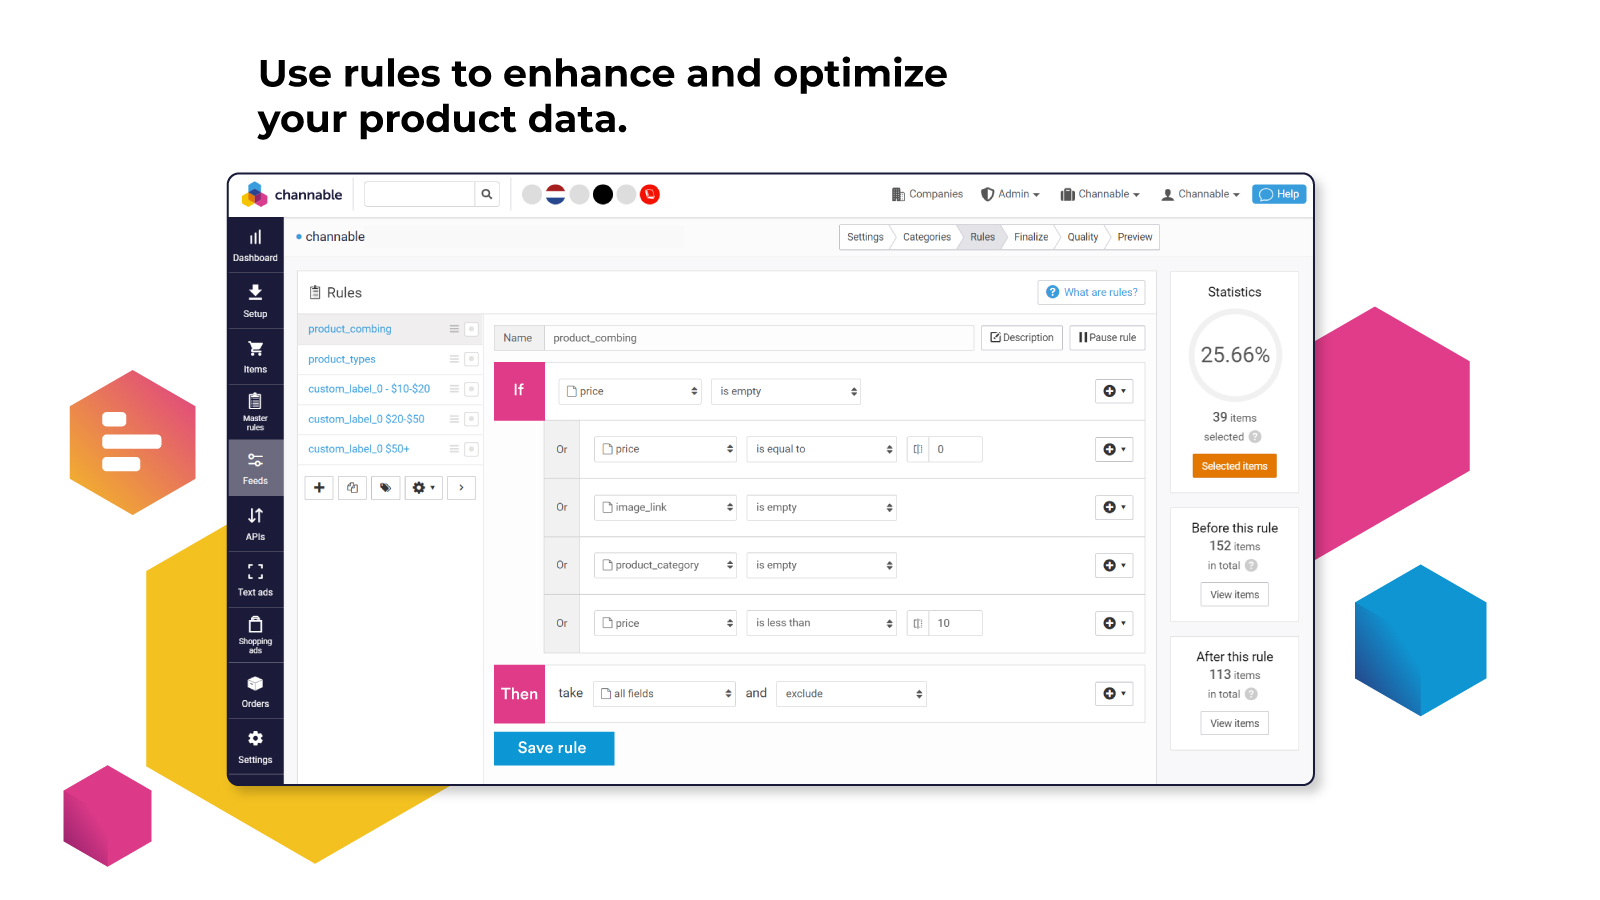 Use rules to enhance and optimize your product data